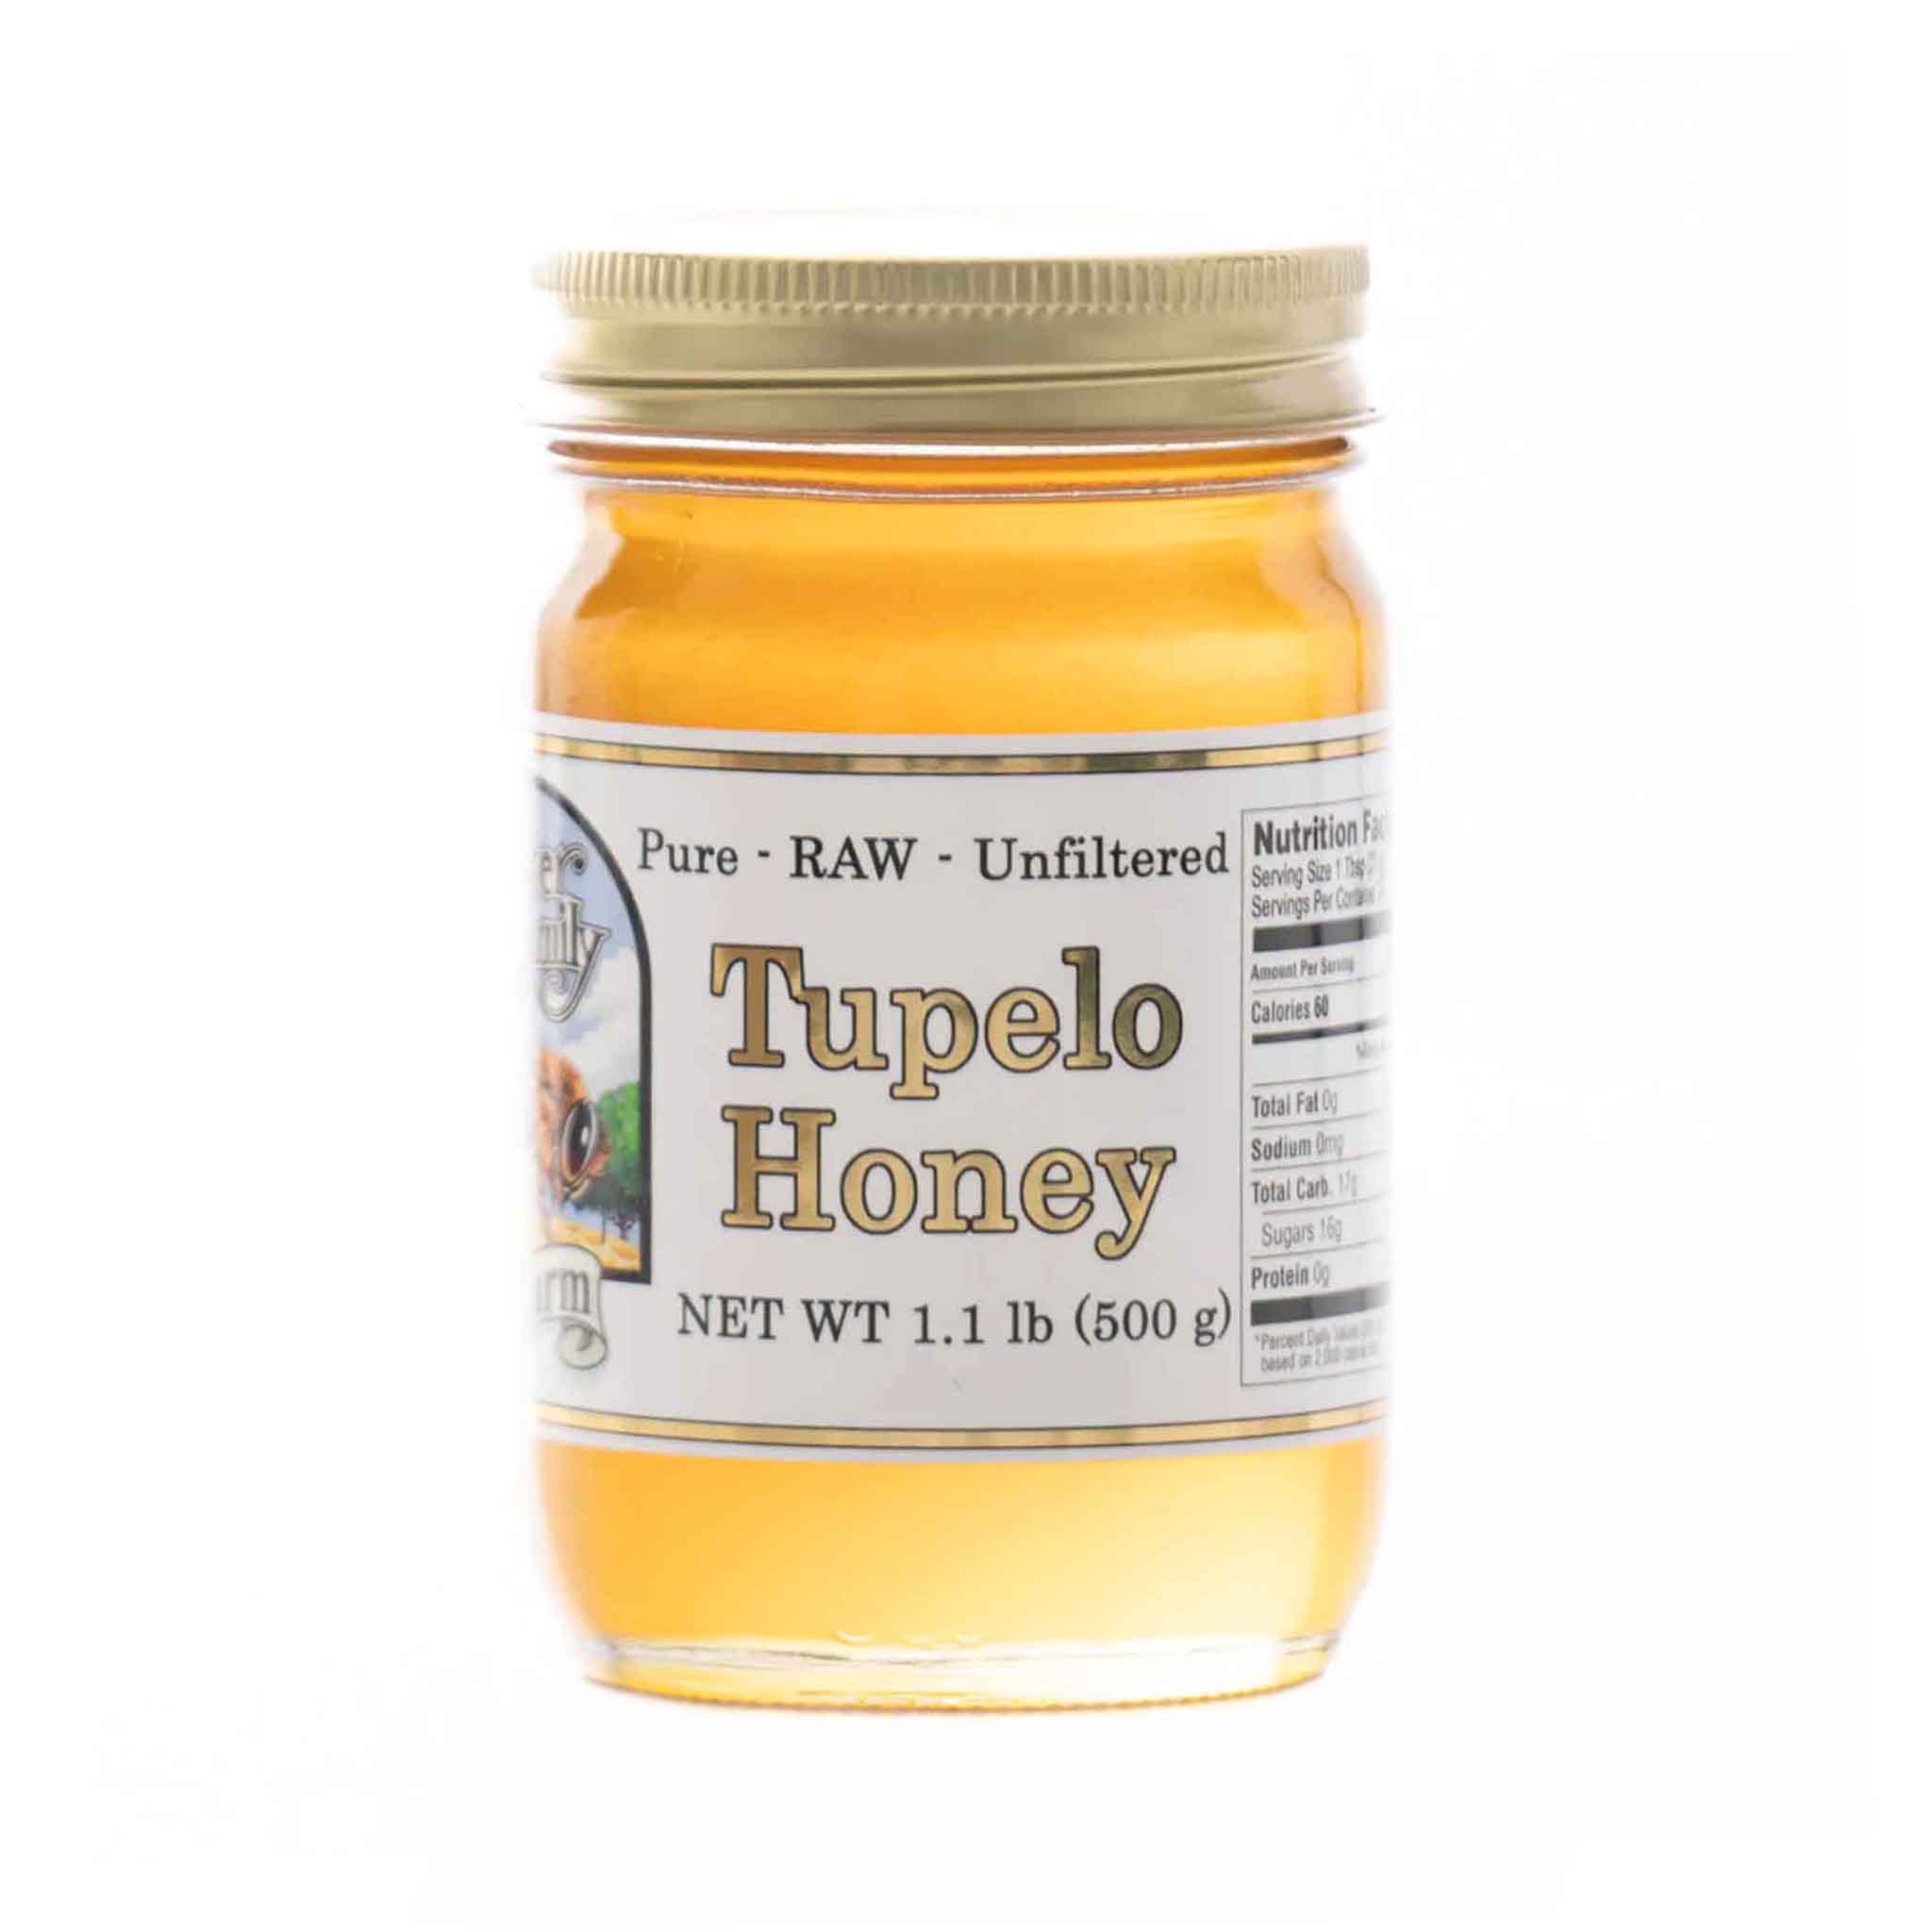 Pure, Raw, Unfiltered Tupelo Honey in a Glass jar